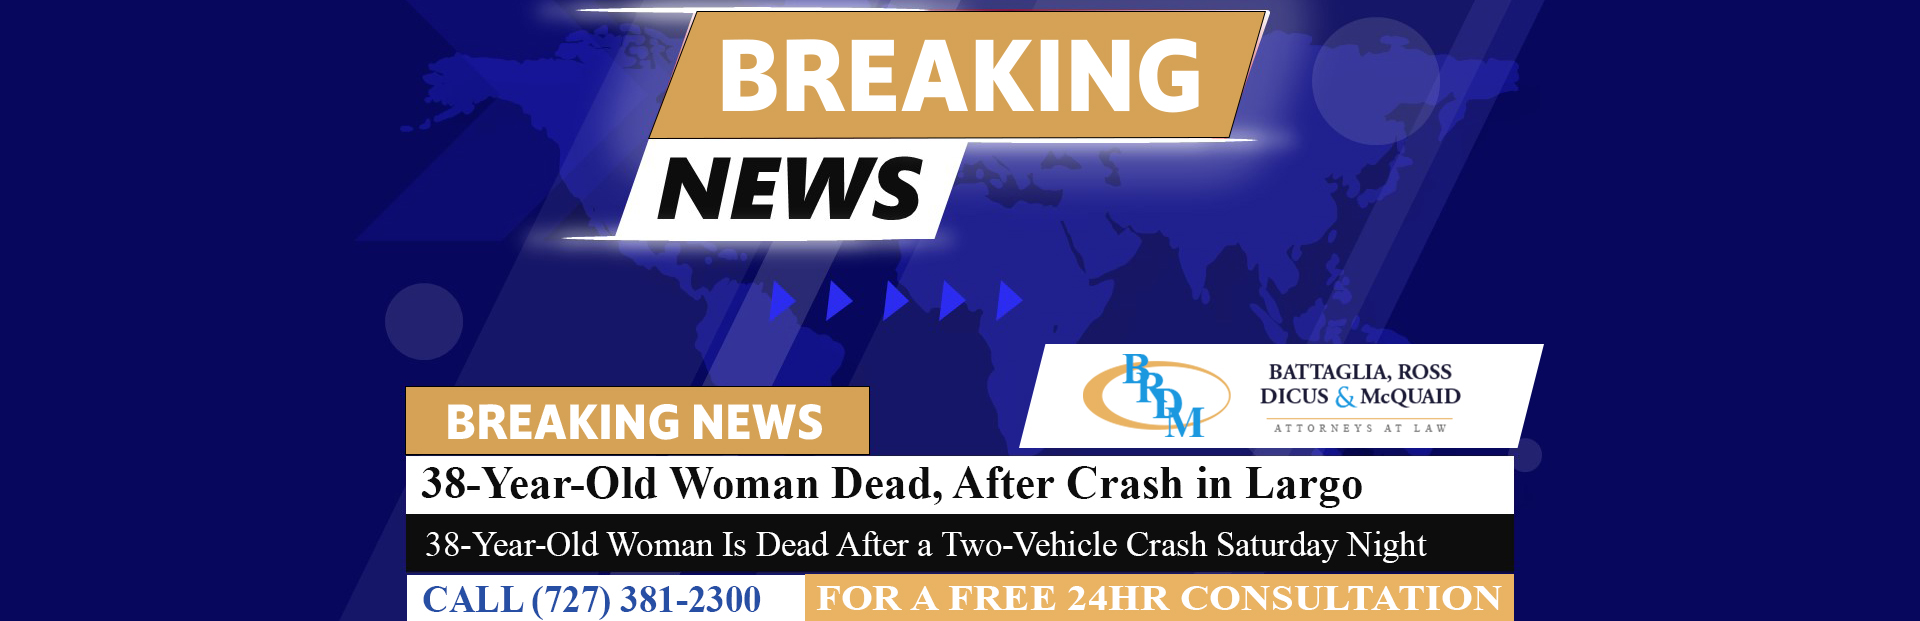 [05-30-23] 38-Year-Old Woman Dead, Child in Critical Condition After Crash in Largo